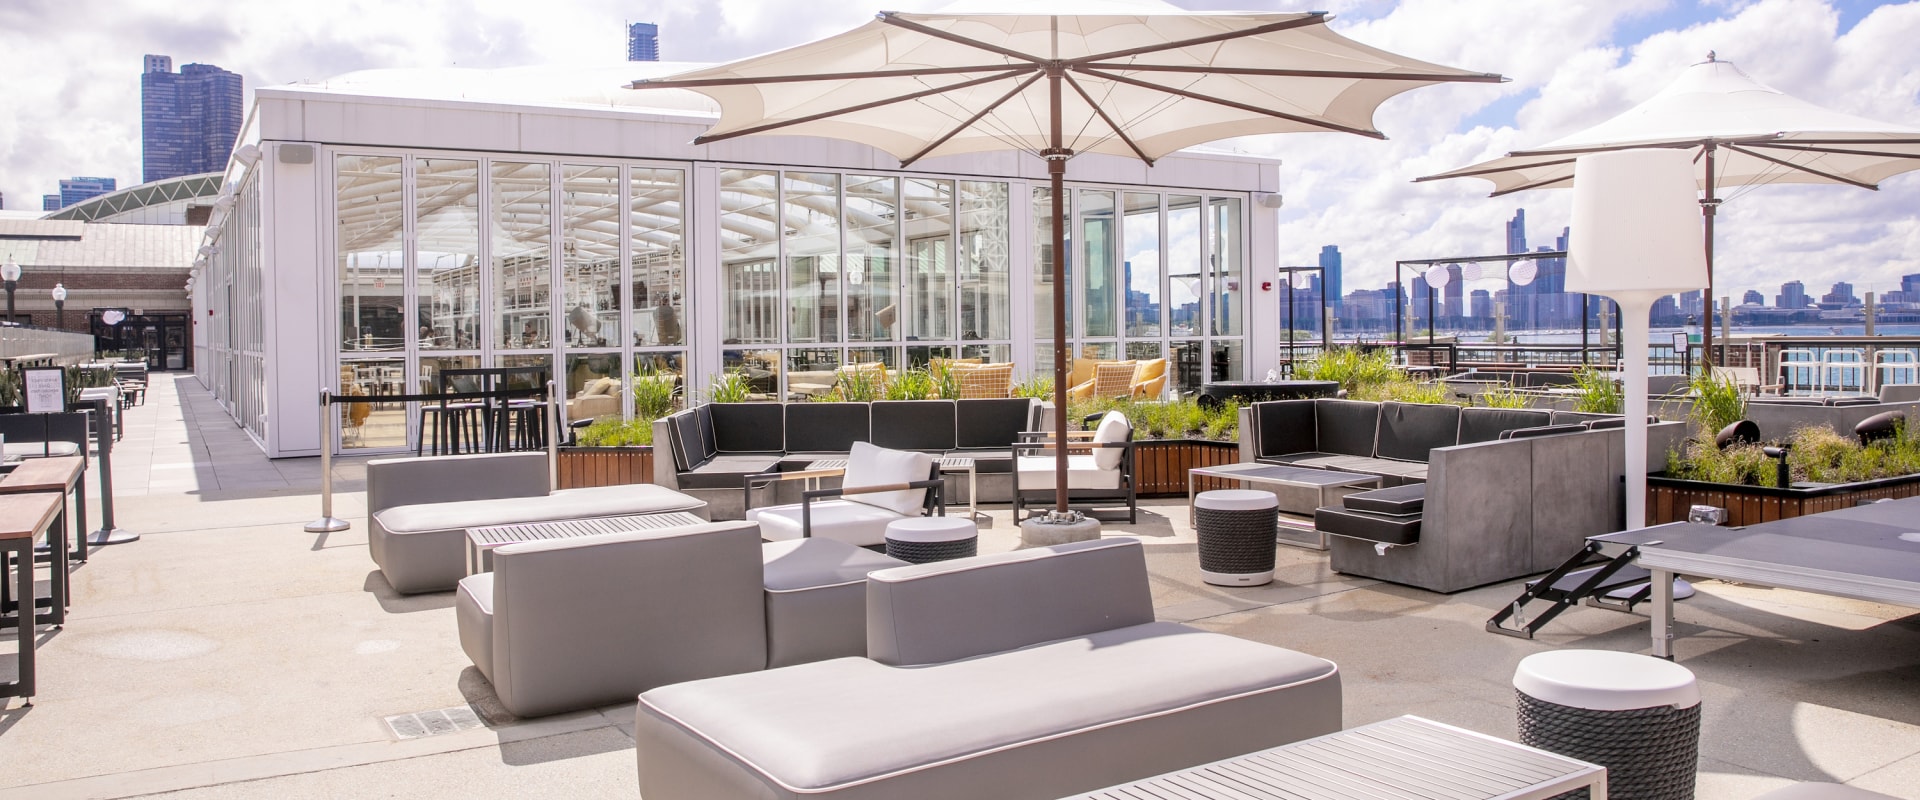 The Ultimate Guide to Rooftop Bars in Chicago, IL